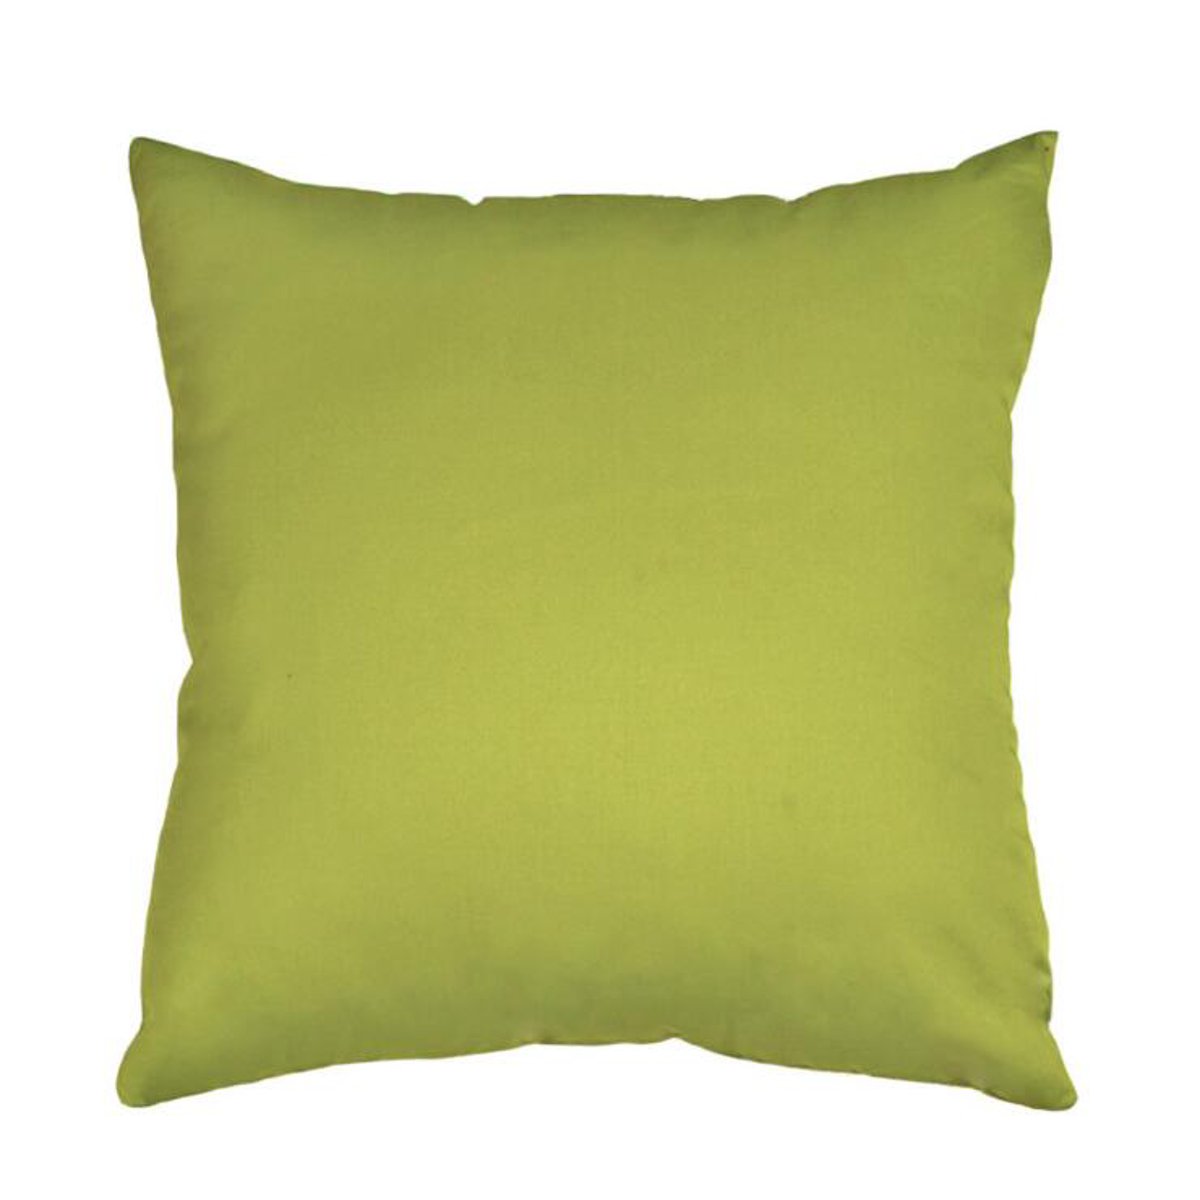 Cotton-Pillow-Case-Solid-Color-Cushion-Cover-Throw-Home-Sofa-Decoration-45X45cm-1579144-7